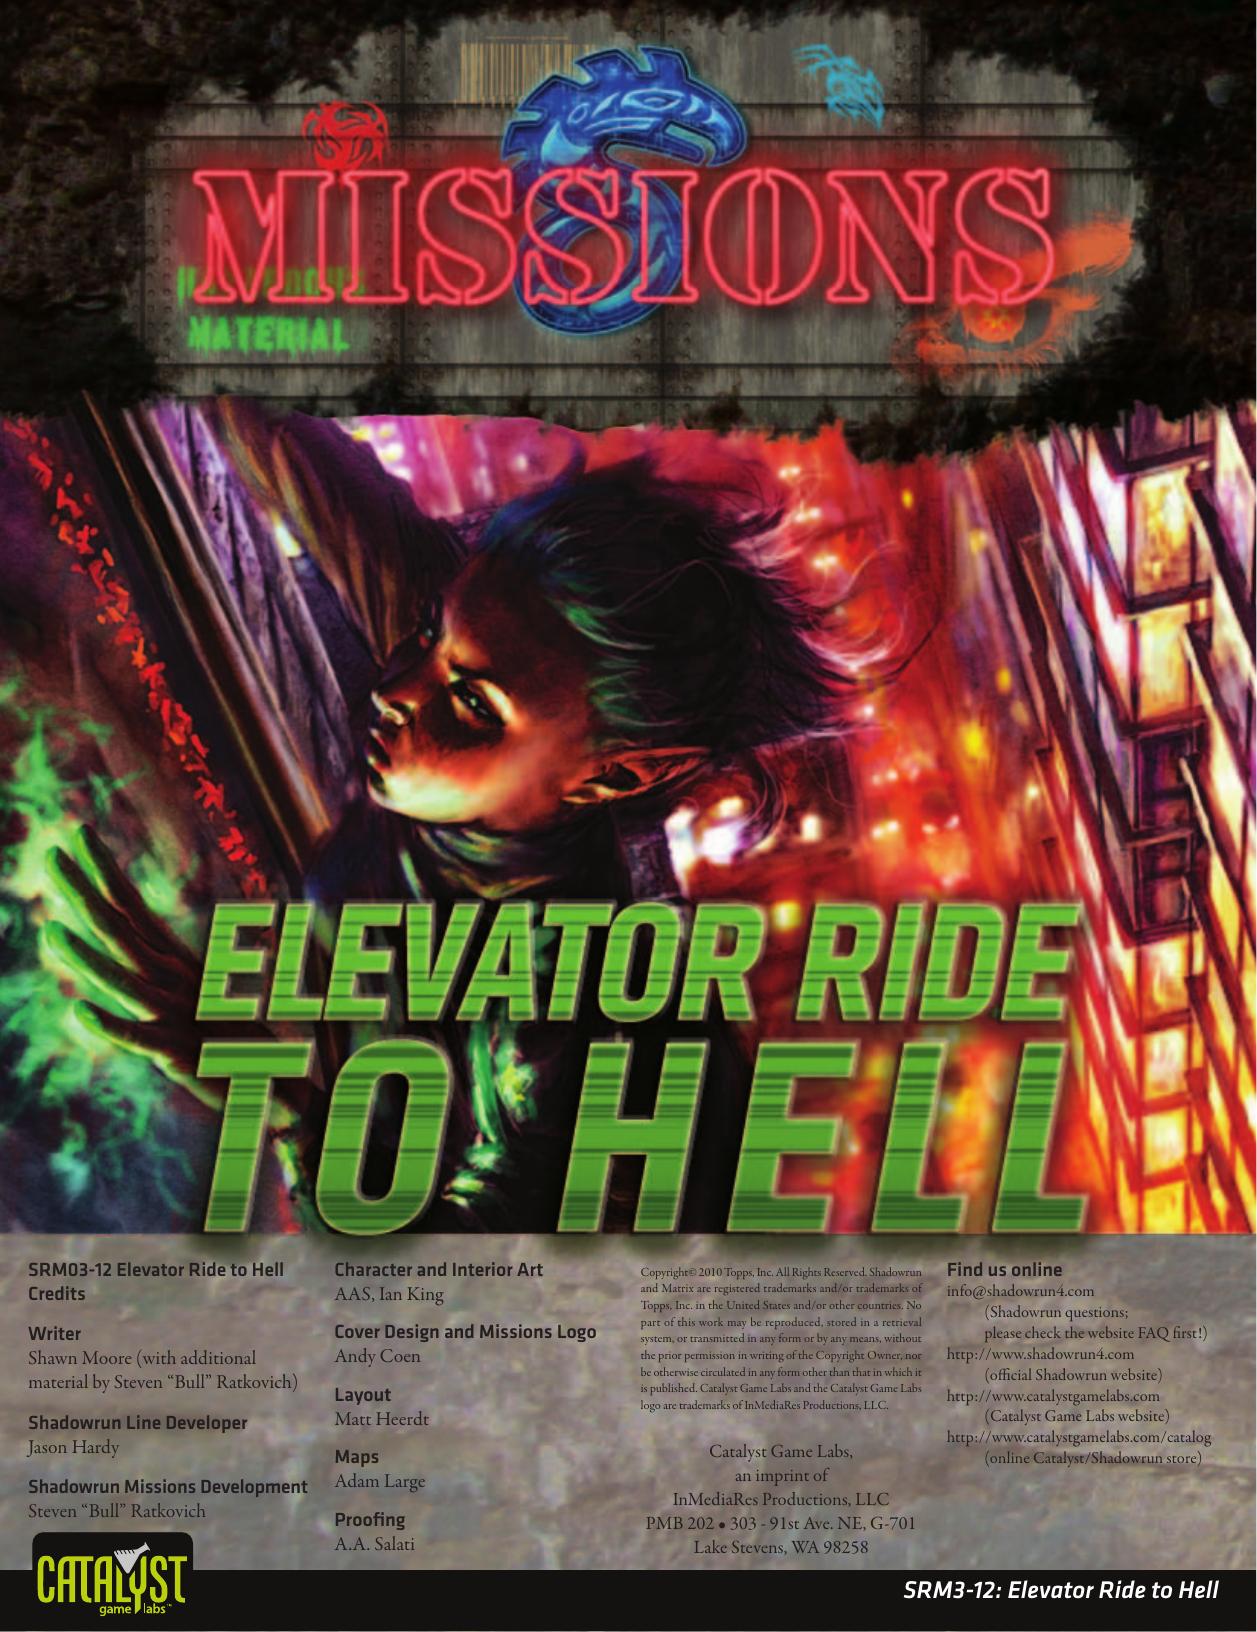 Shadowrun Mission: Elevator Ride to Hell